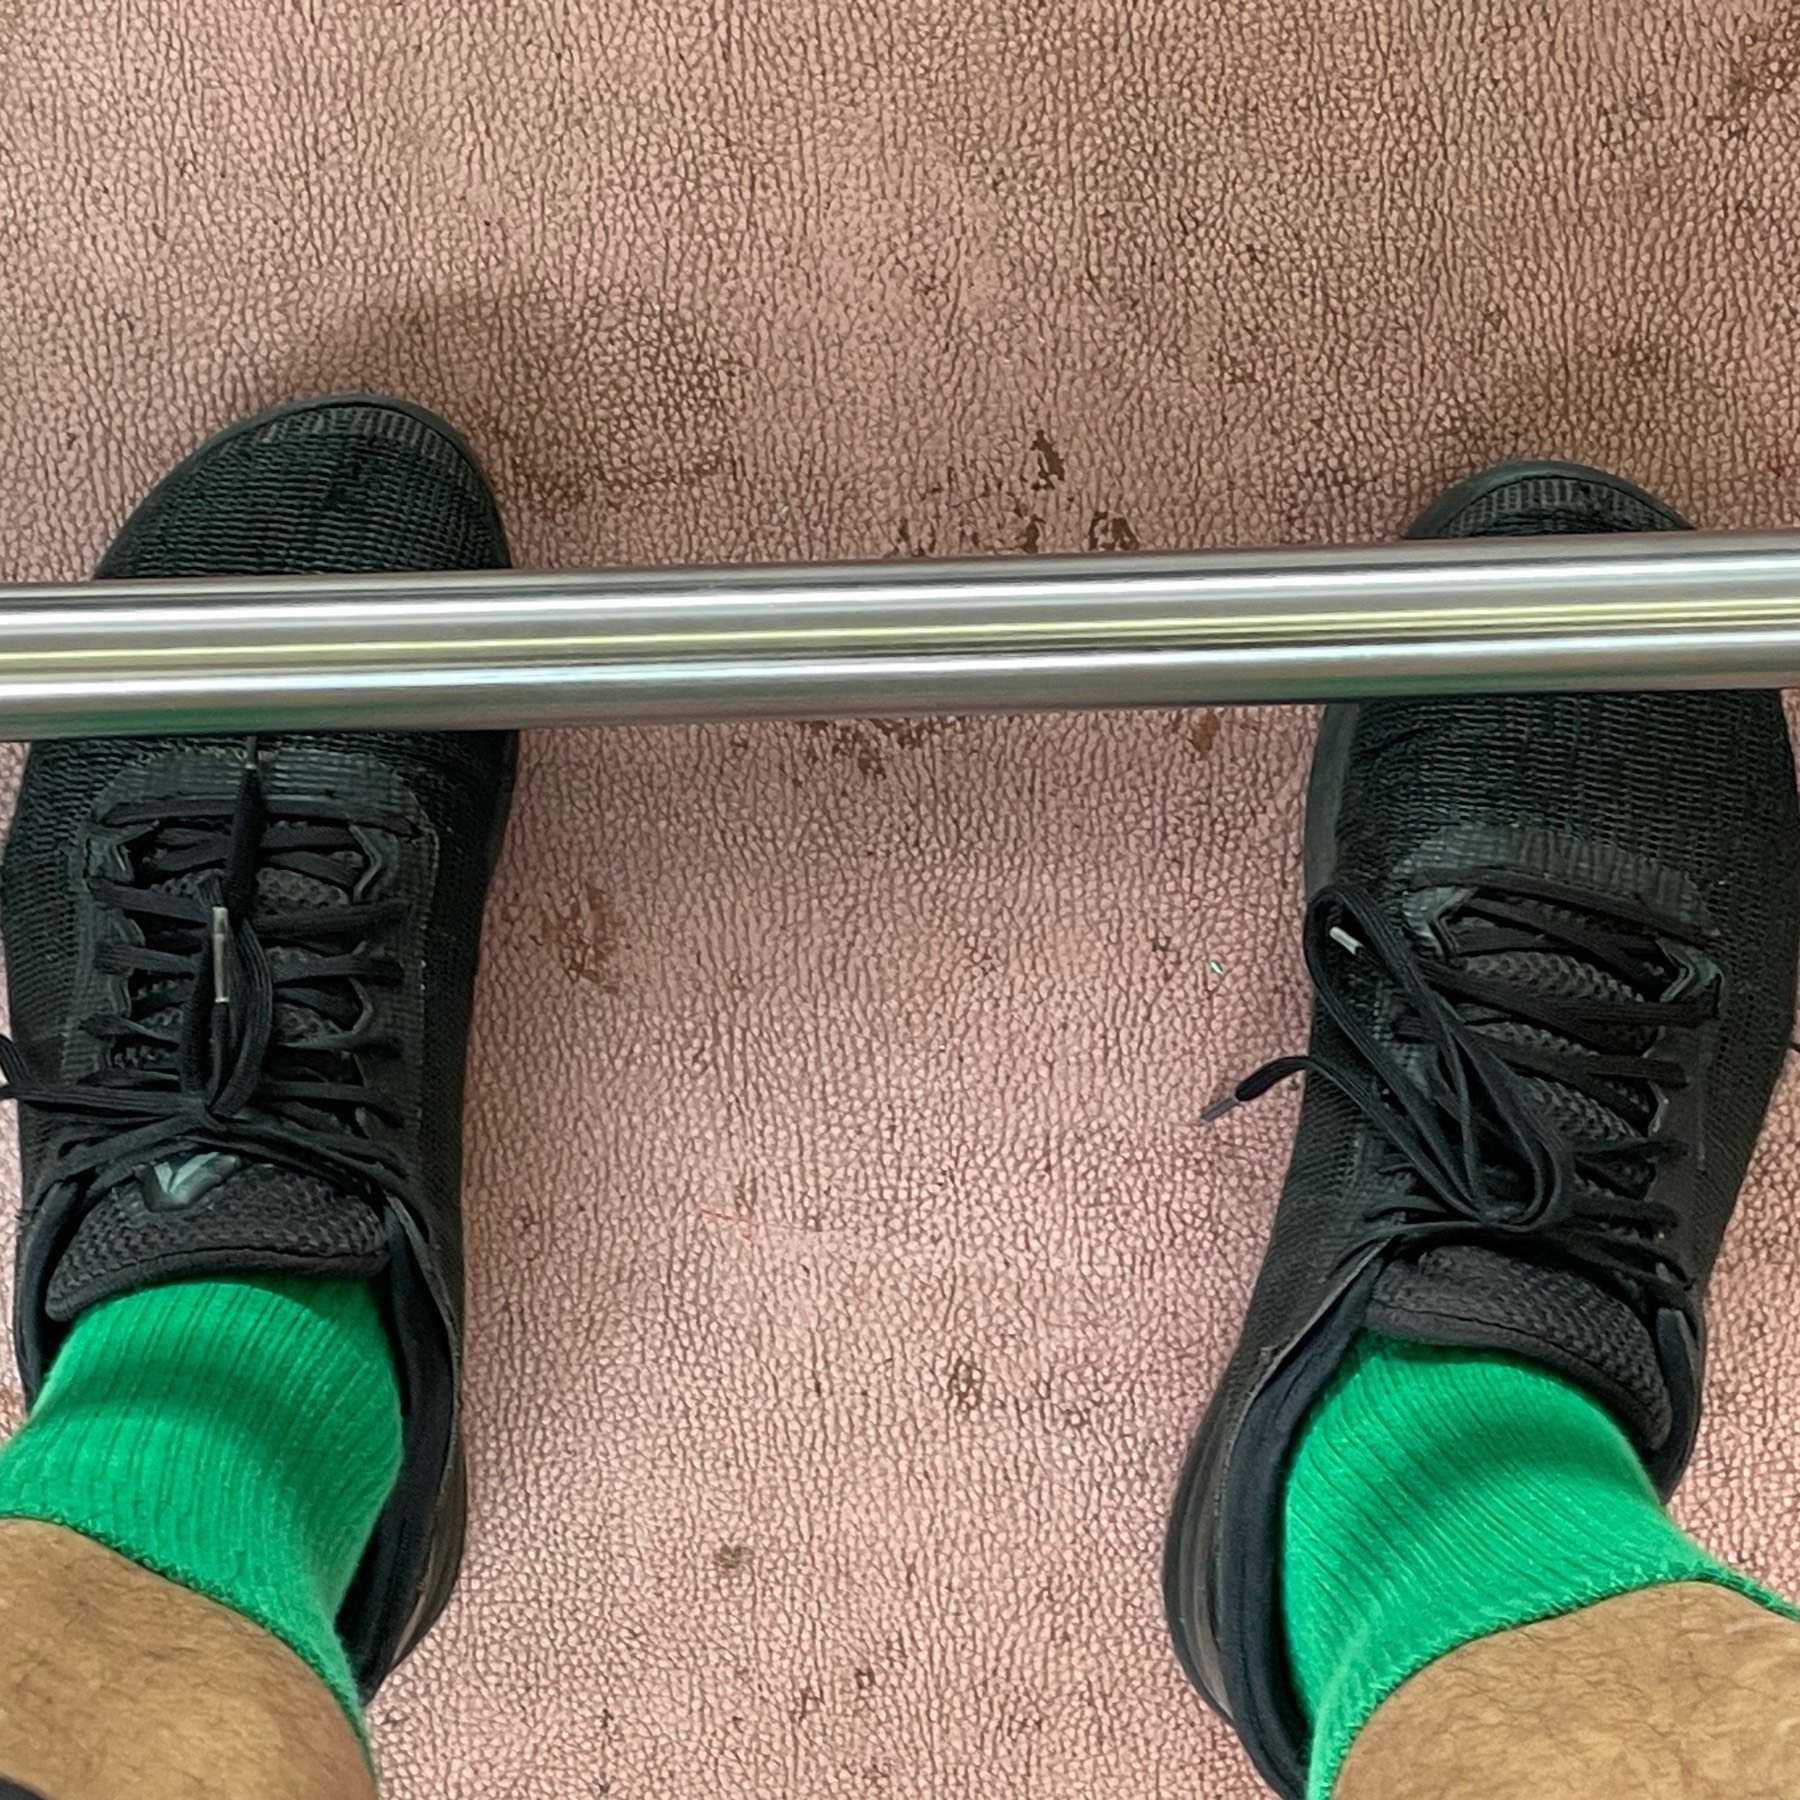 Cropped shot of shoes and a barbell